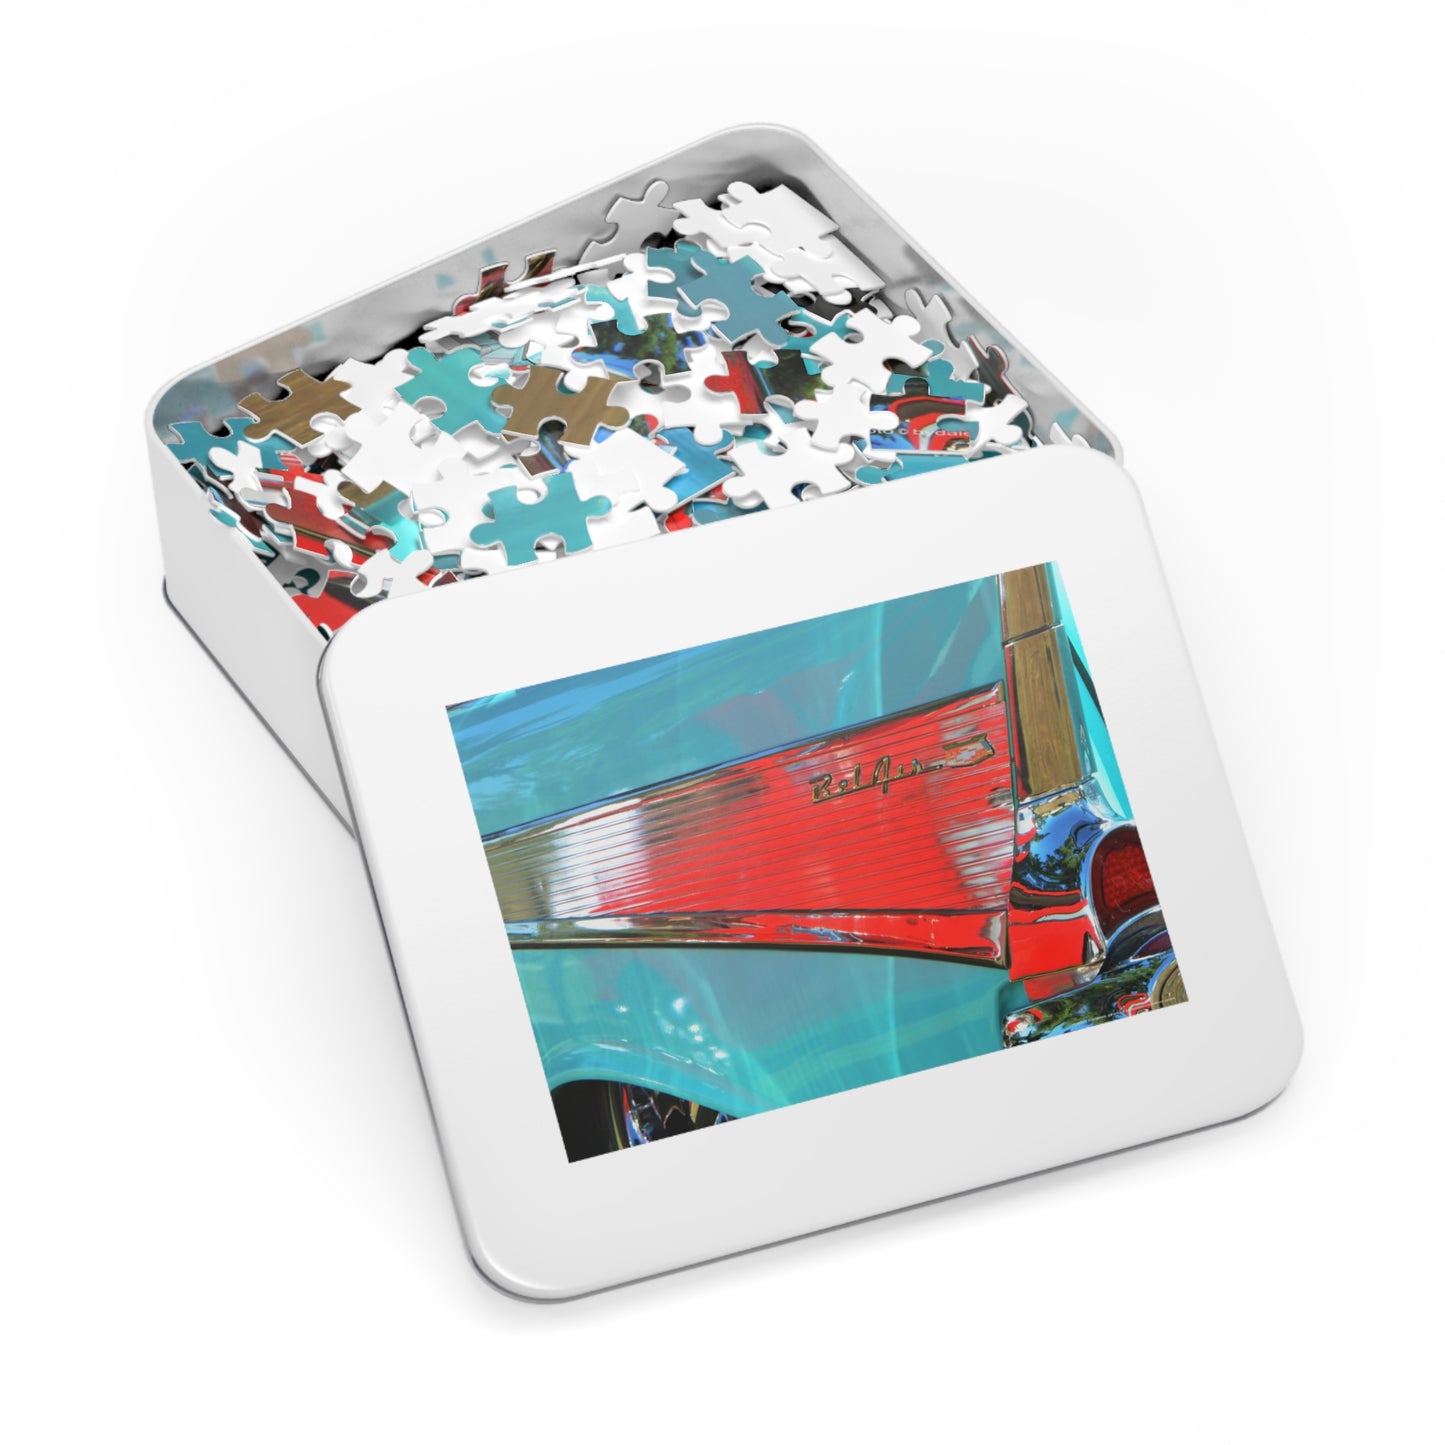 Chevy Bel Air Jigsaw Puzzle (30, 110, 252, 500,1000-Piece)